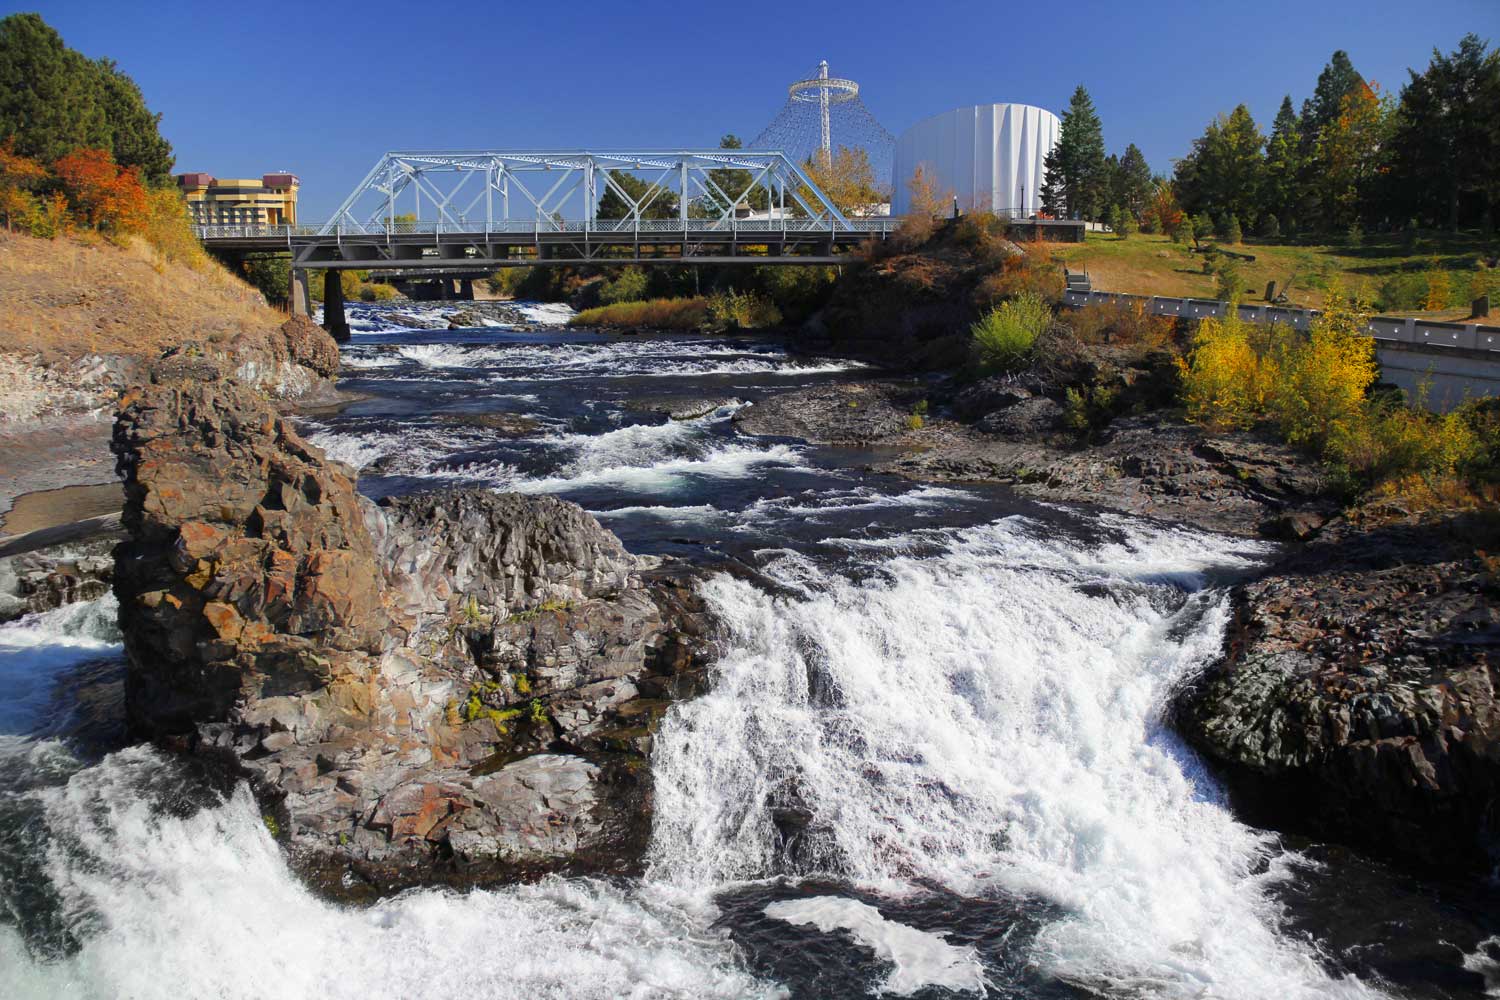 Friends of the Falls and Spokane River Forum to Merge Organizations, Vision for the Spokane River